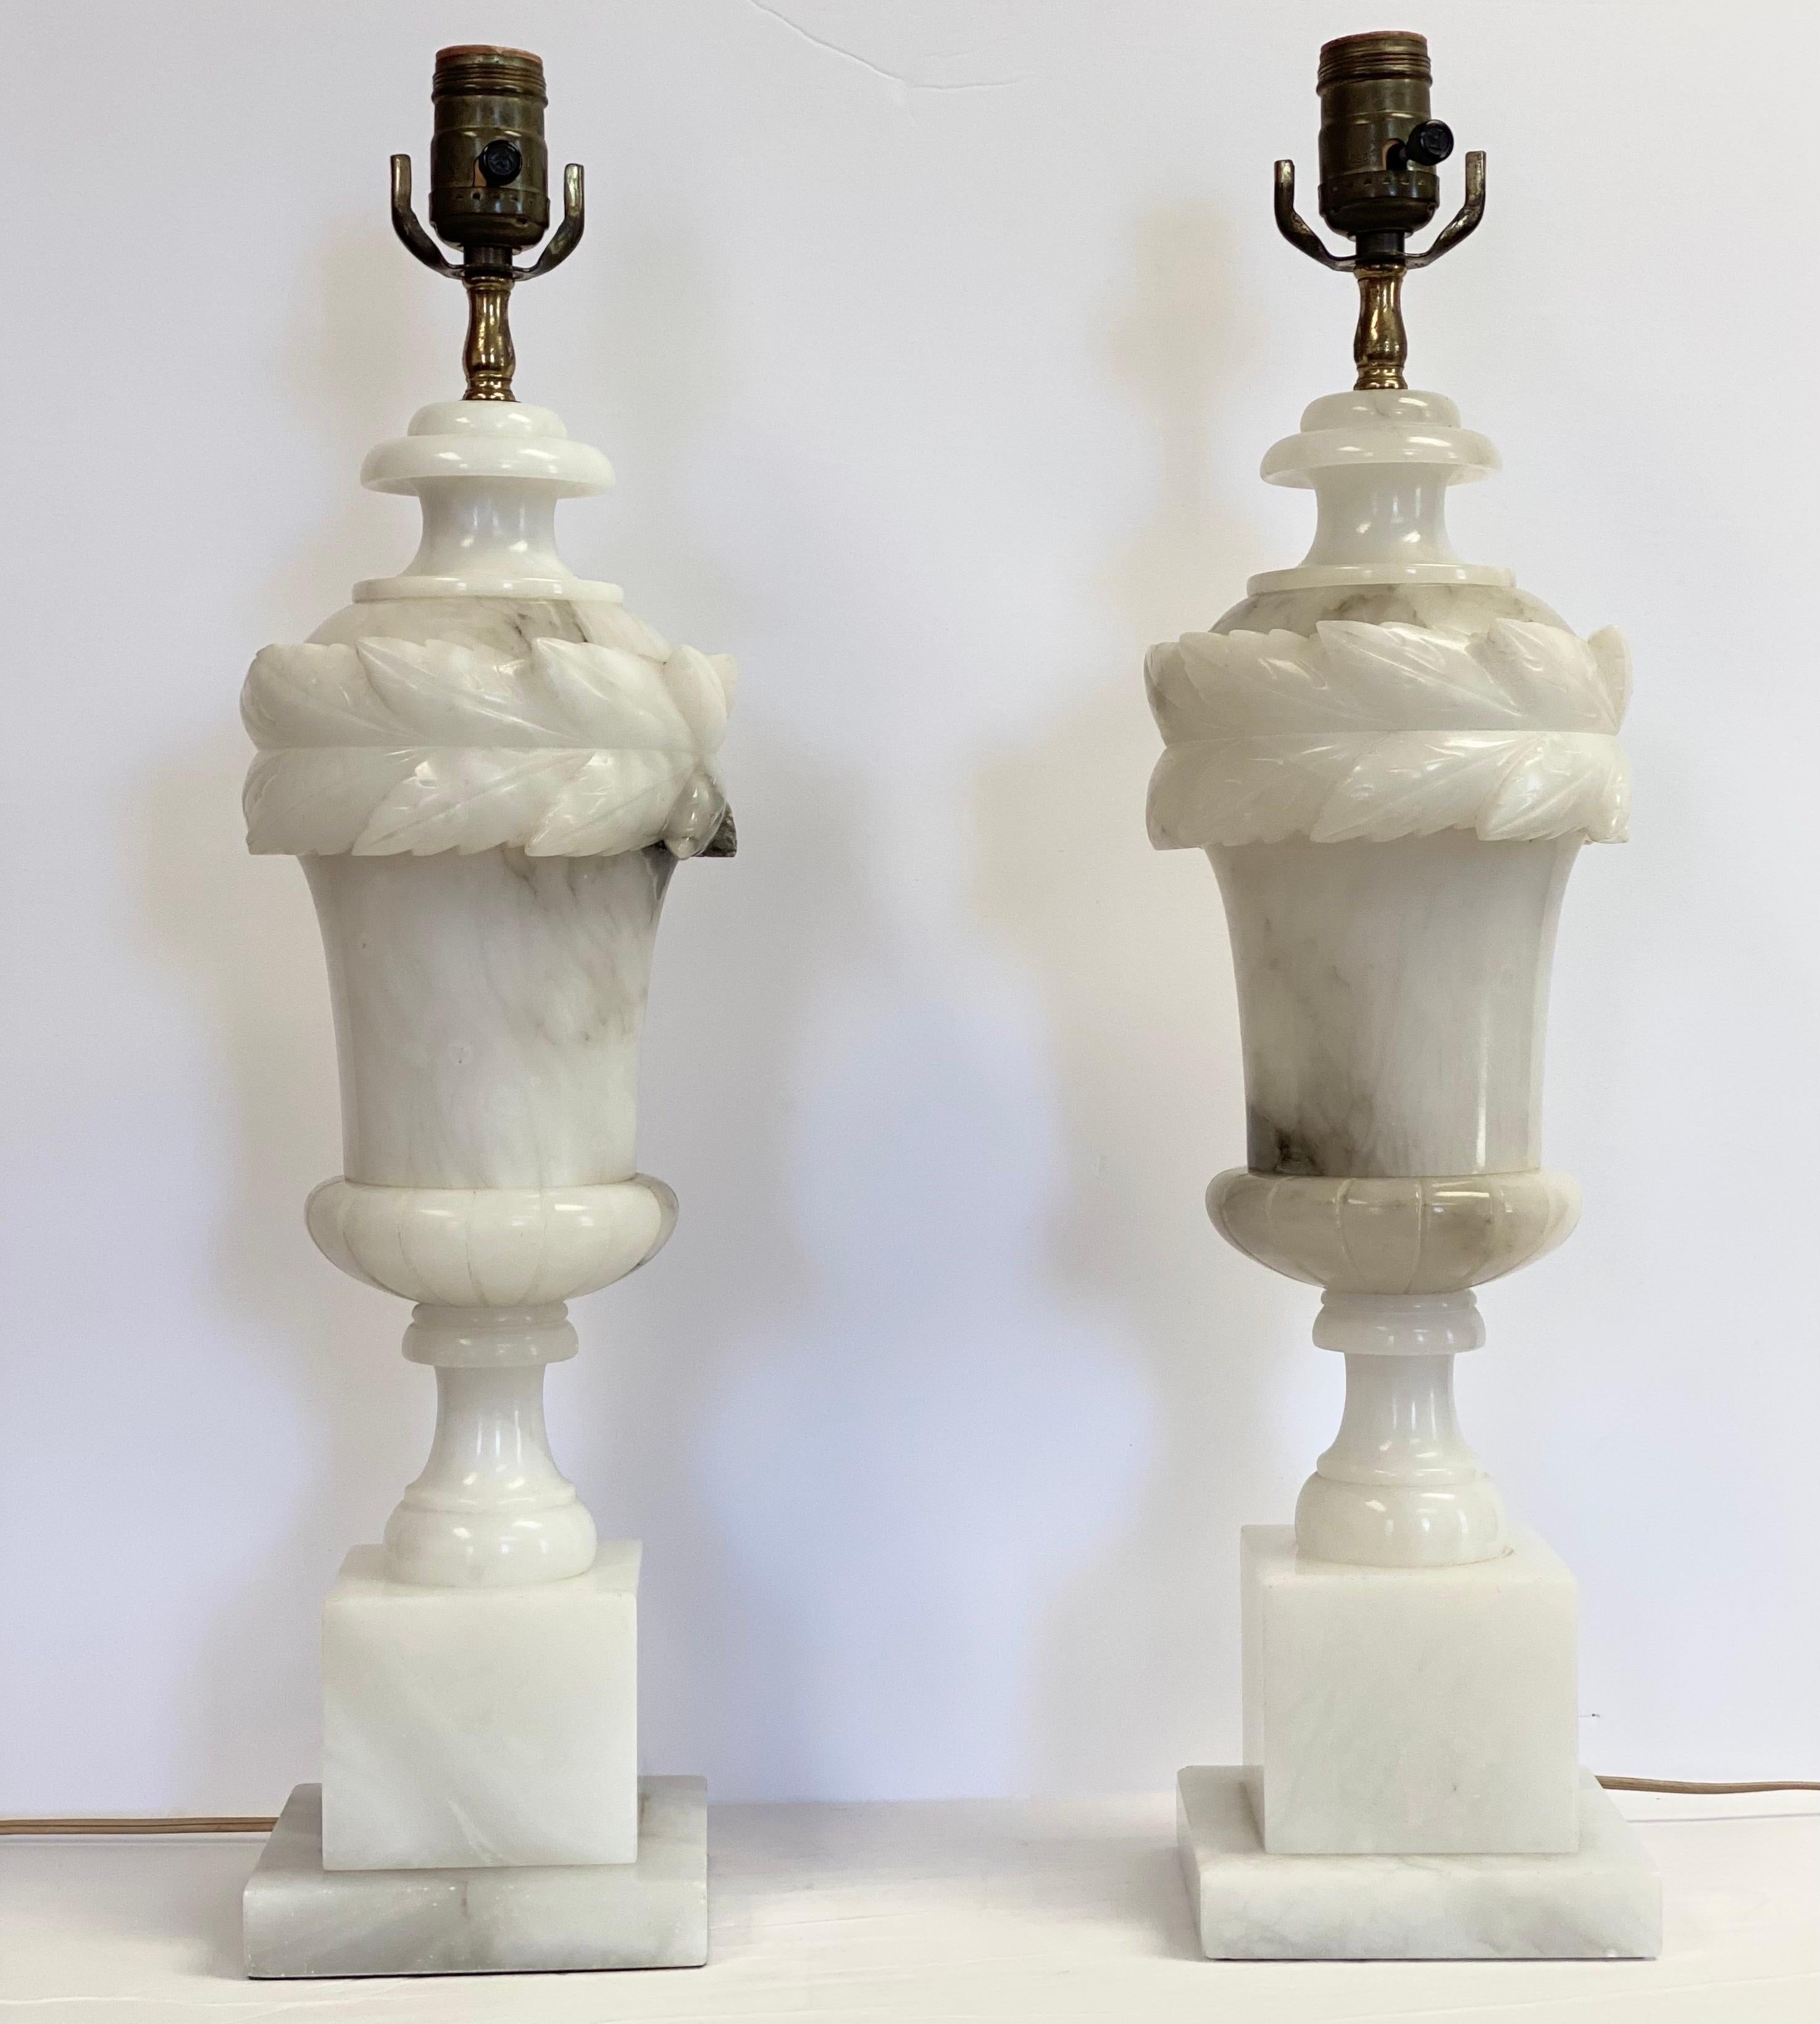 We are very pleased to offer a pair of traditional, Italian table lamps circa the 1950s. The intrinsic beauty of white marble stone shines through this handcrafted pair. To attest to its elegant and refined look, each piece is carved from white